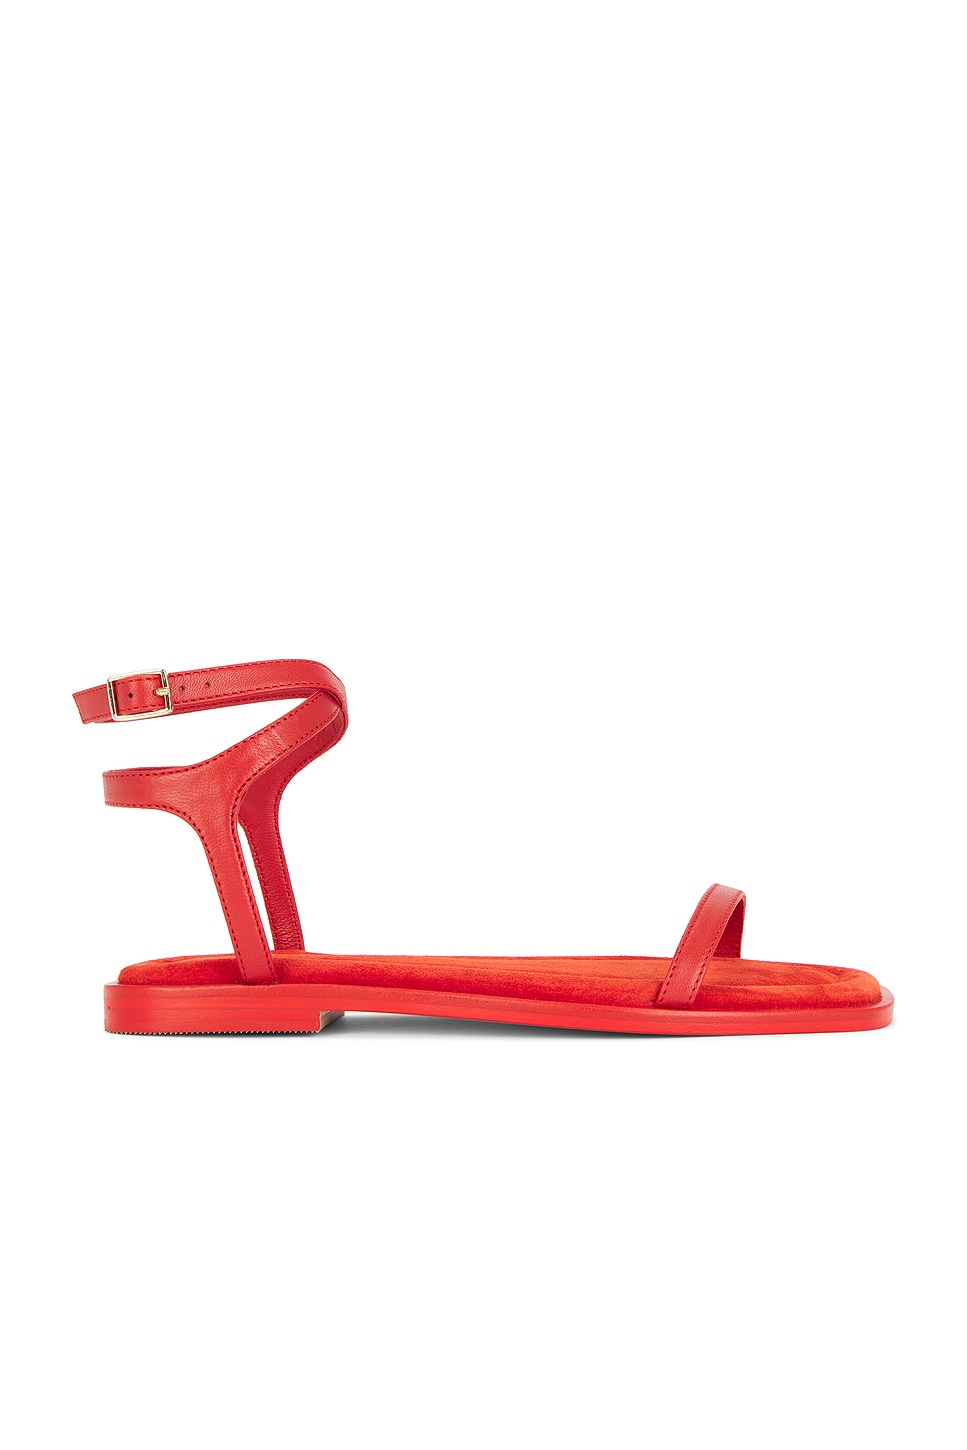 Image 1 of A.EMERY Viv Sandal in Poppy Suede